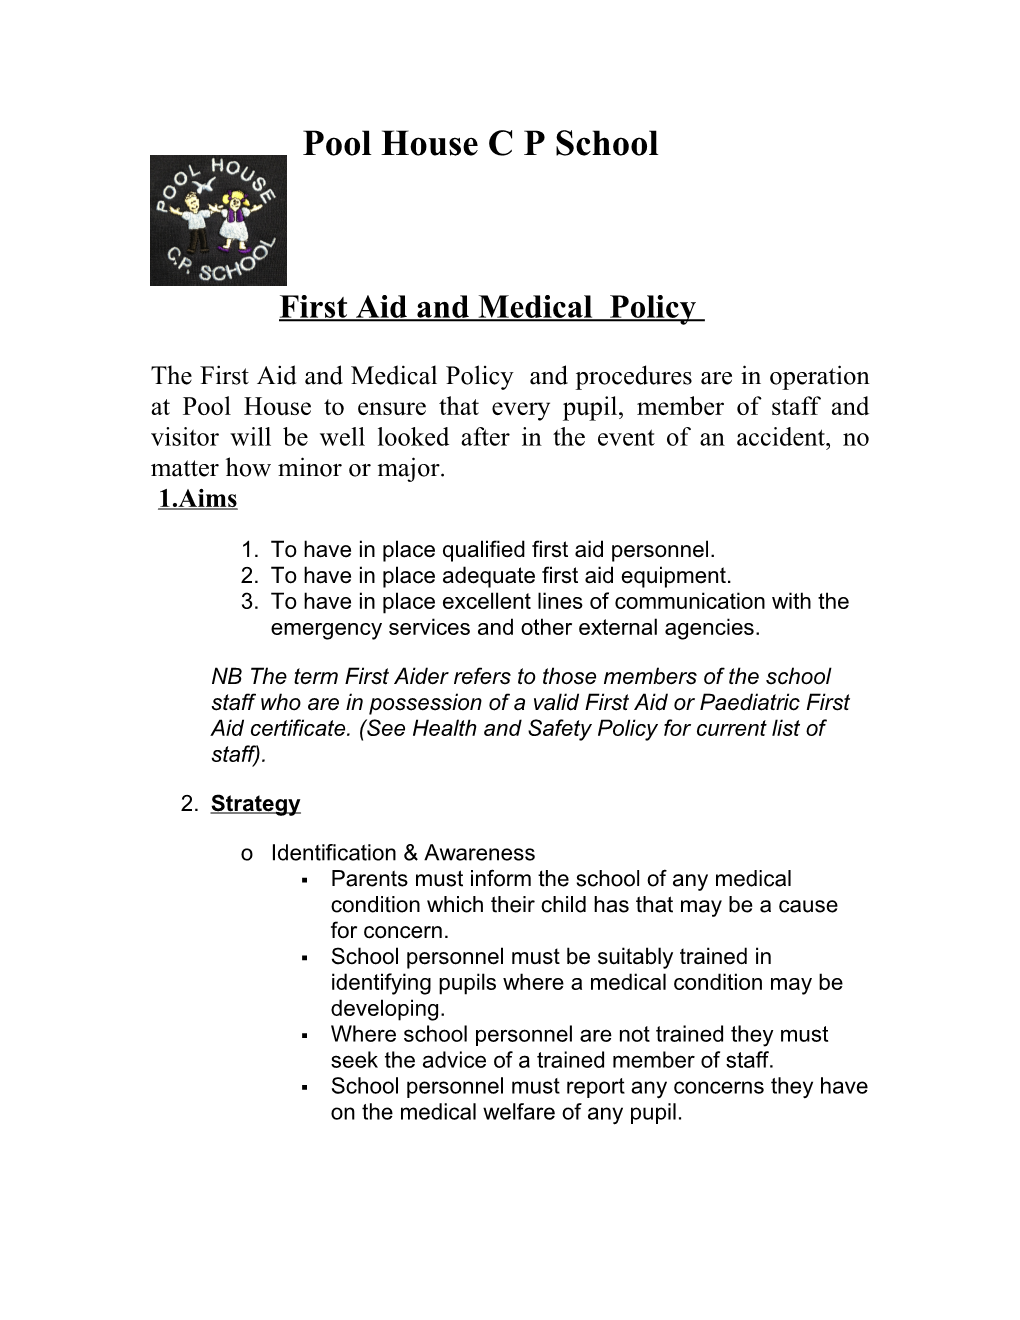 Medical & First Aid Policy